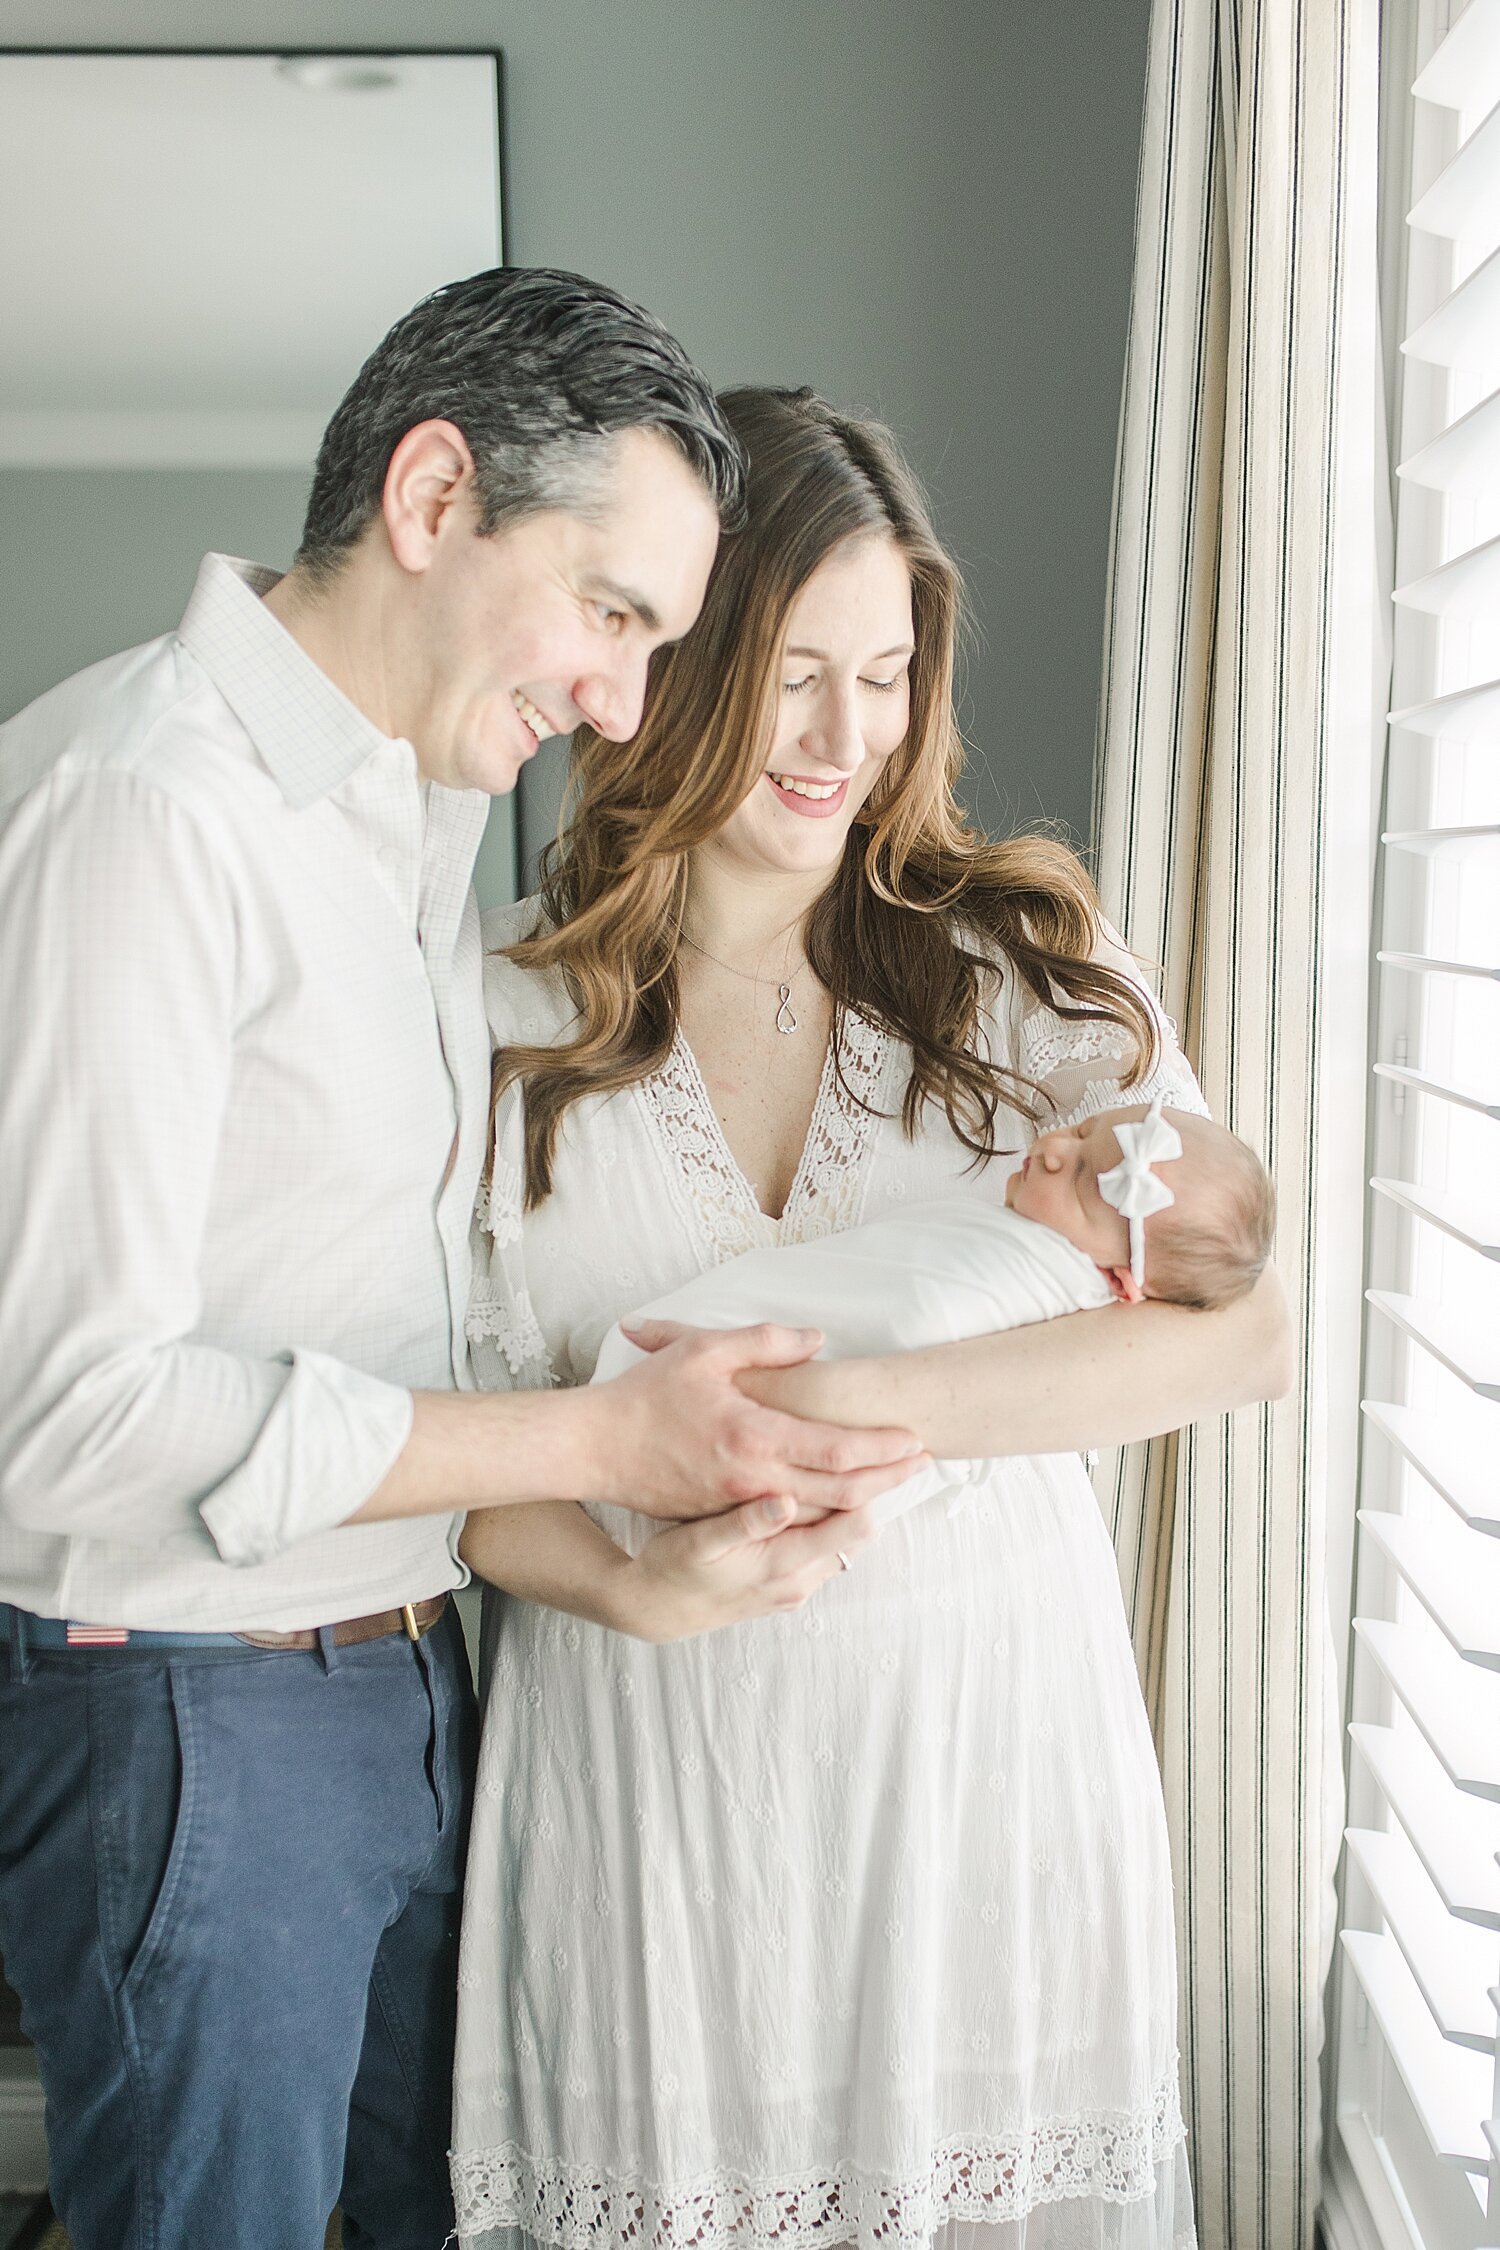 Mom and Dad standing by window with newborn. Photo by Kristin Wood Photography.